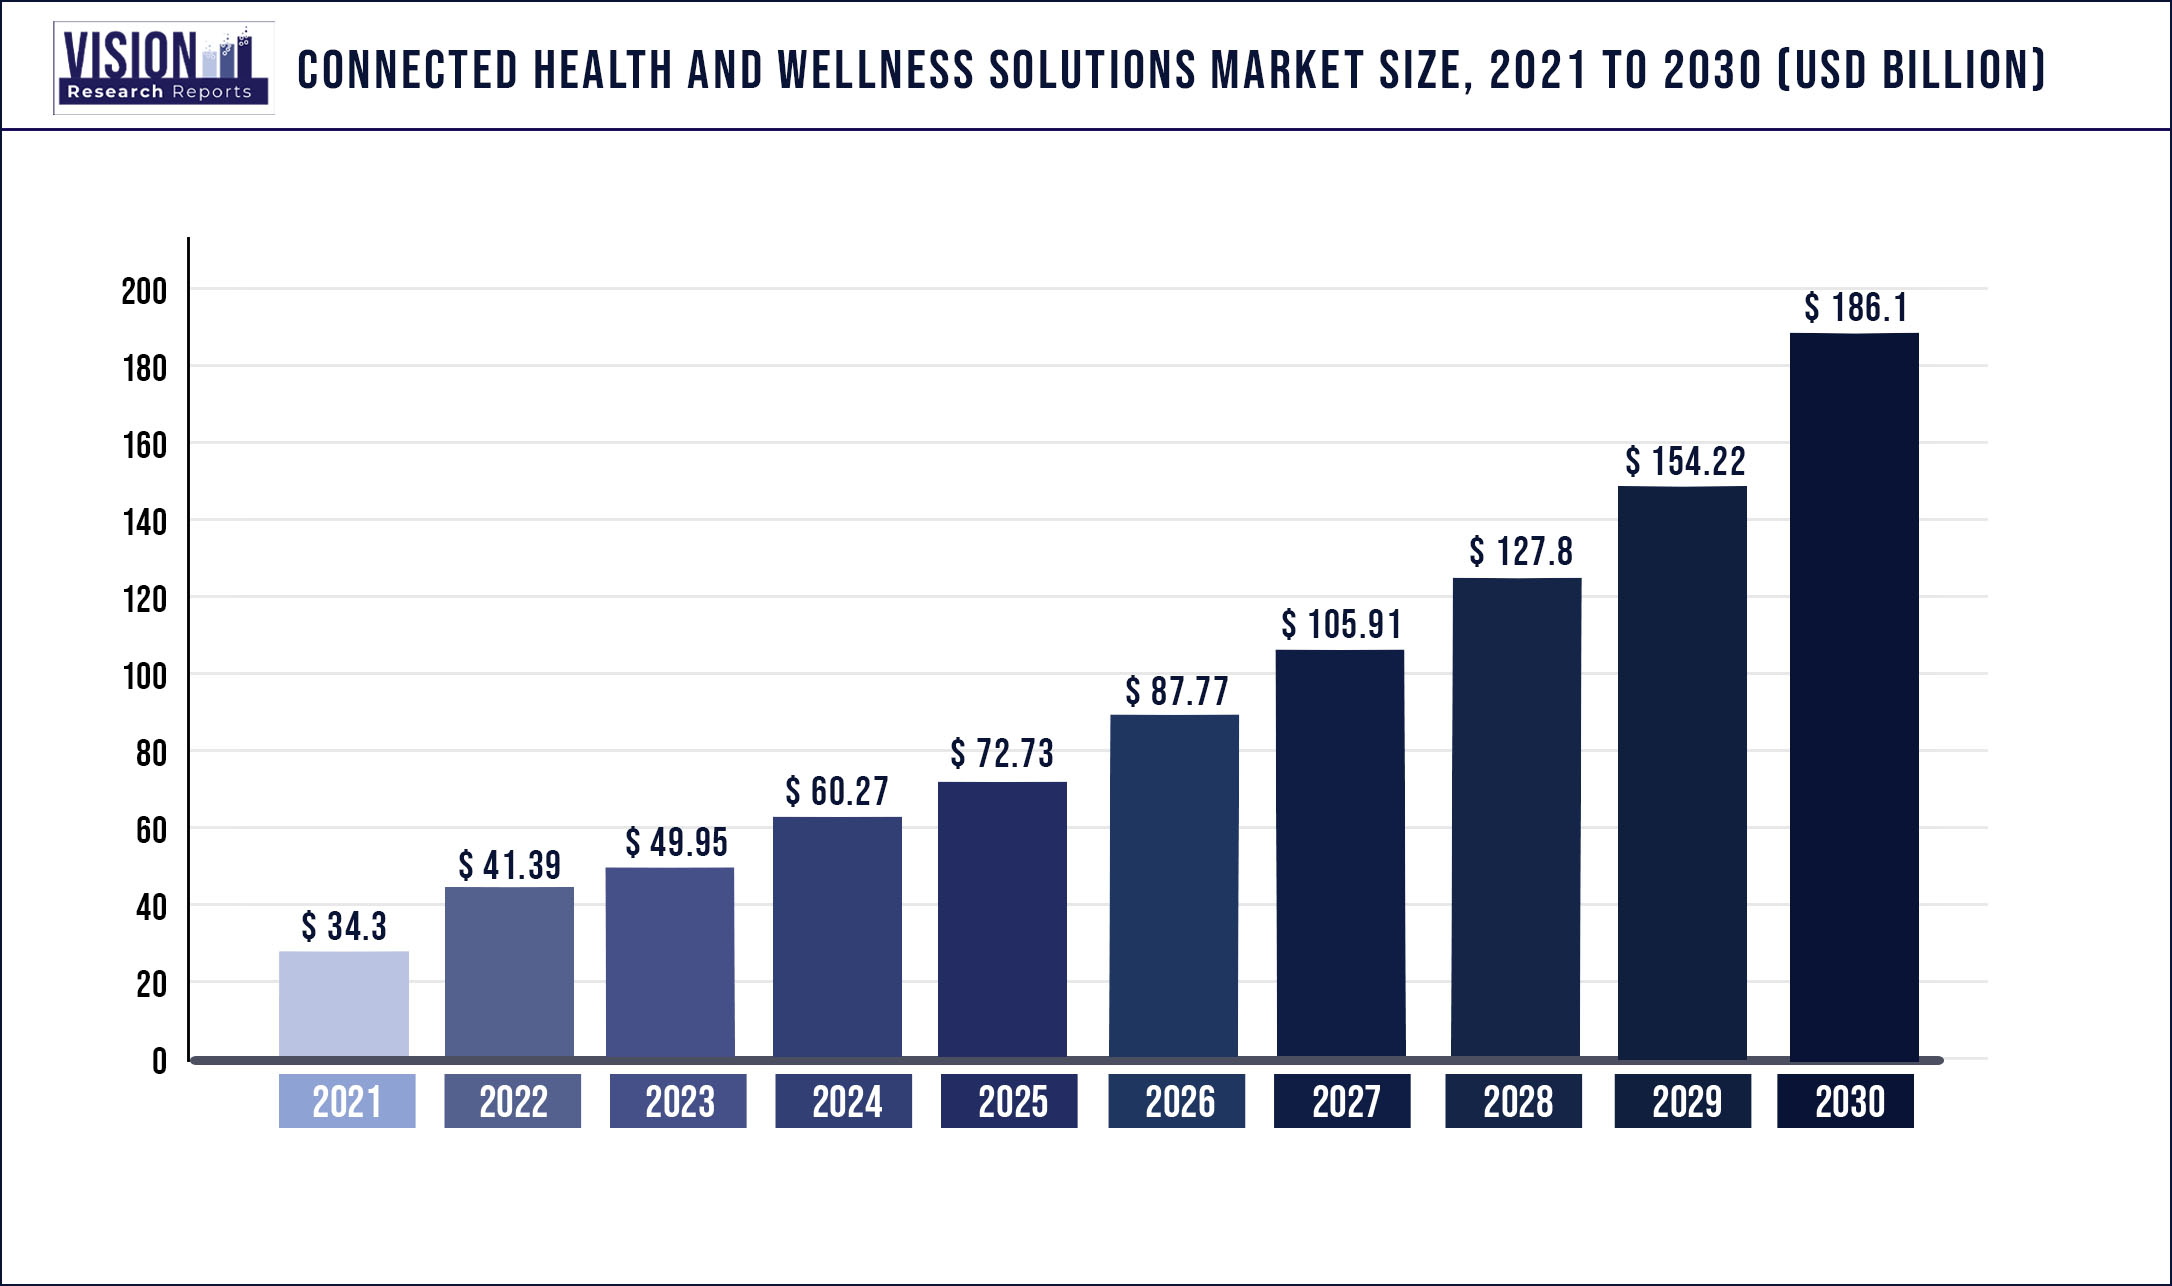 Connected Health And Wellness Solutions Market Size 2021 to 2030